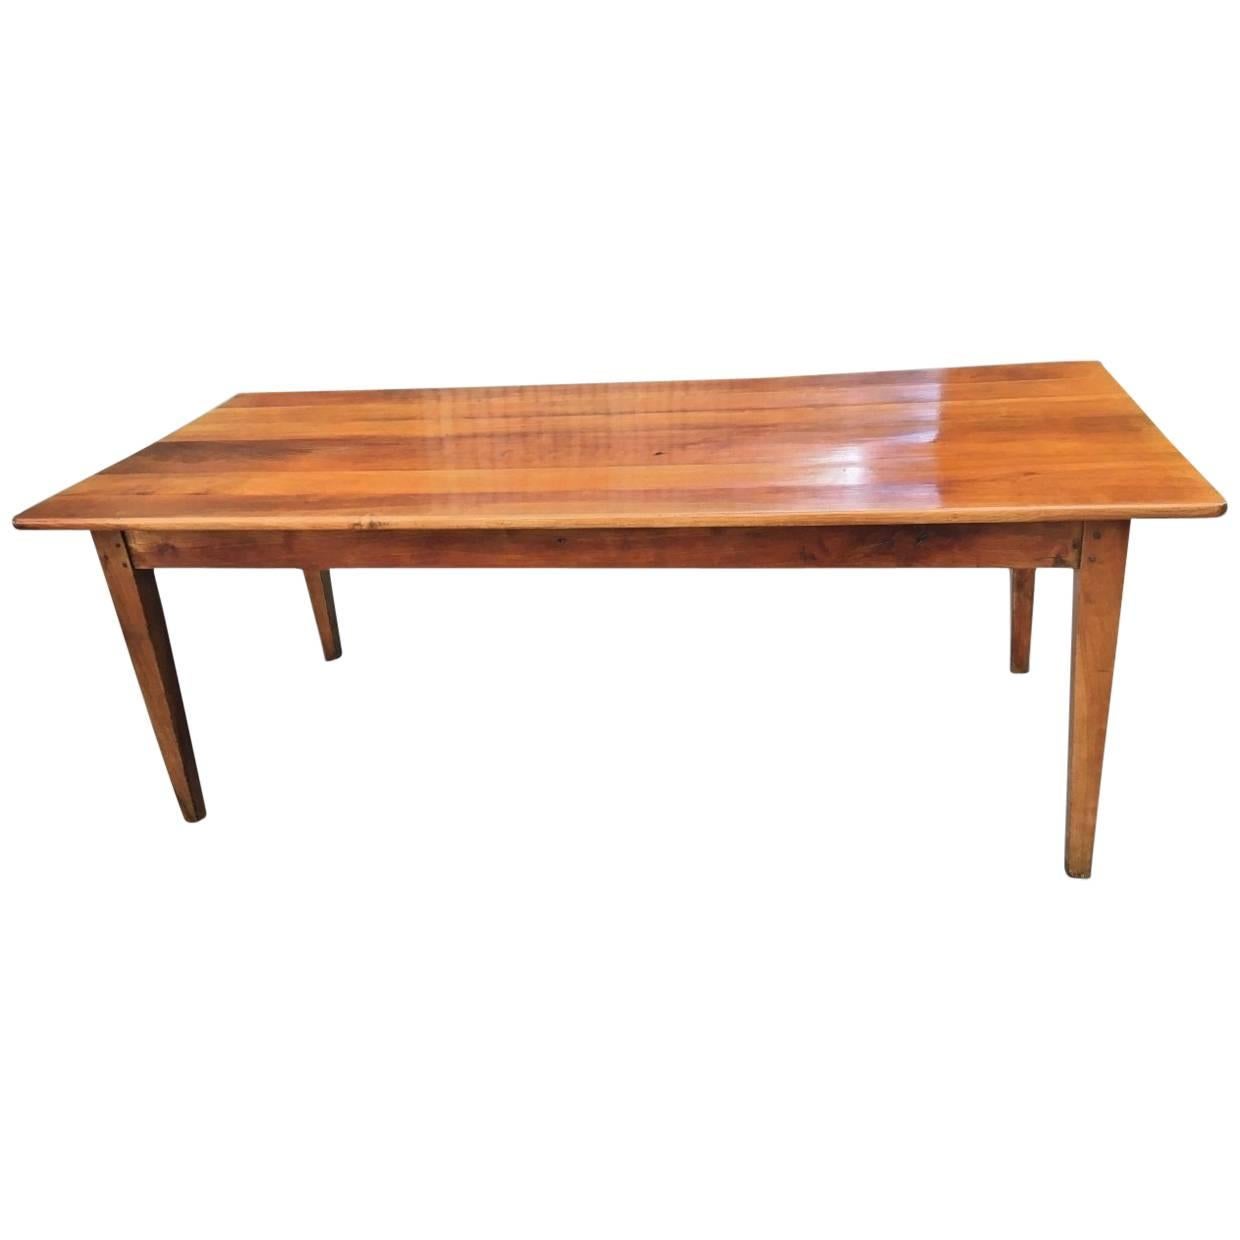 Cherry wood Farmhouse Table. Kitchen Table. Dining Table c1900